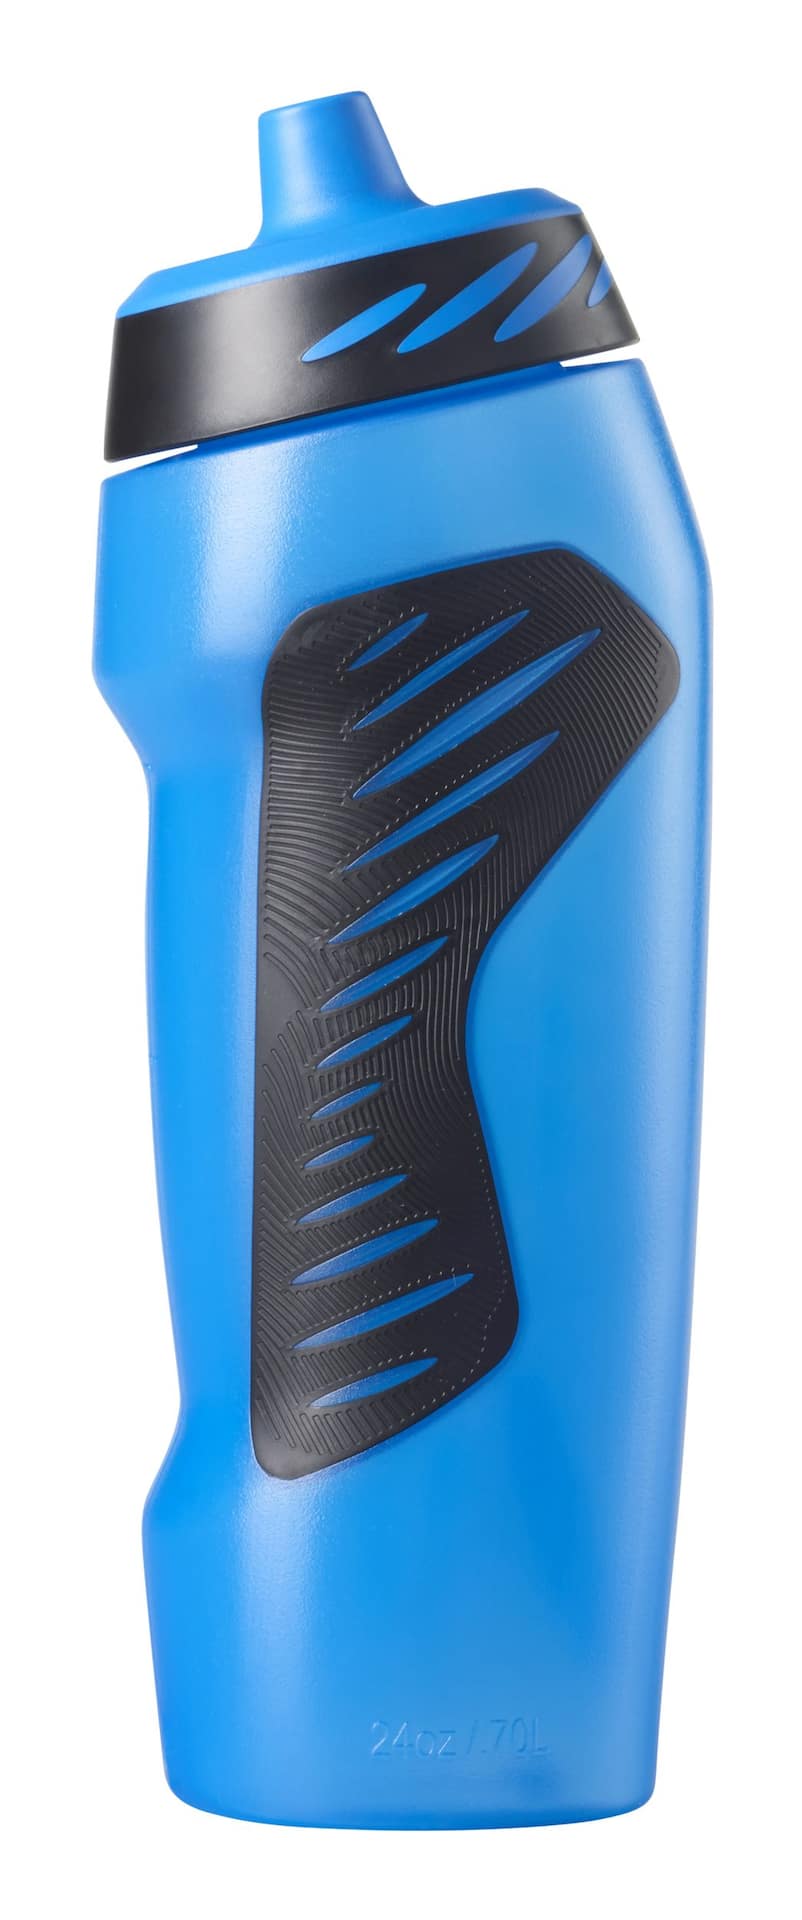 https://media-www.canadiantire.ca/product/playing/exercise/exercise-accessories/1840586/nike-hyperfuel-water-bottle-24oz-blue-black-white-d6966d76-bced-4fe6-a493-50375ec26281-jpgrendition.jpg